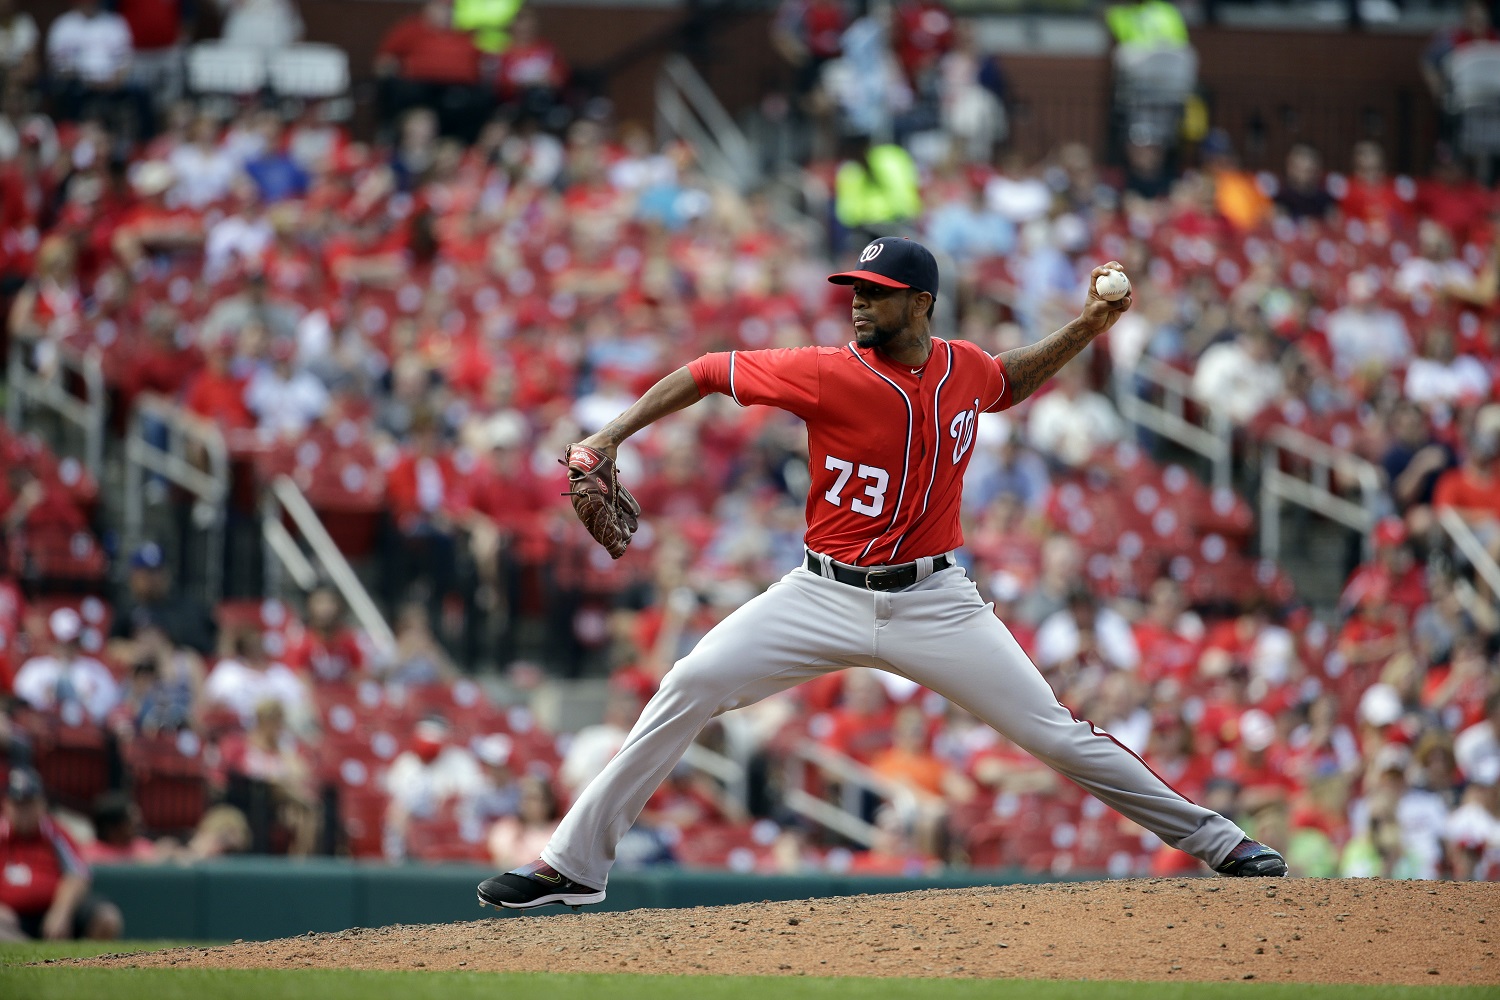 Washington Nationals relief pitcher Felipe Rivero throws during the eighth inning of a baseball game against the St. Louis Cardinals Sunday, May 1, 2016, in St. Louis. (AP Photo/Jeff Roberson)